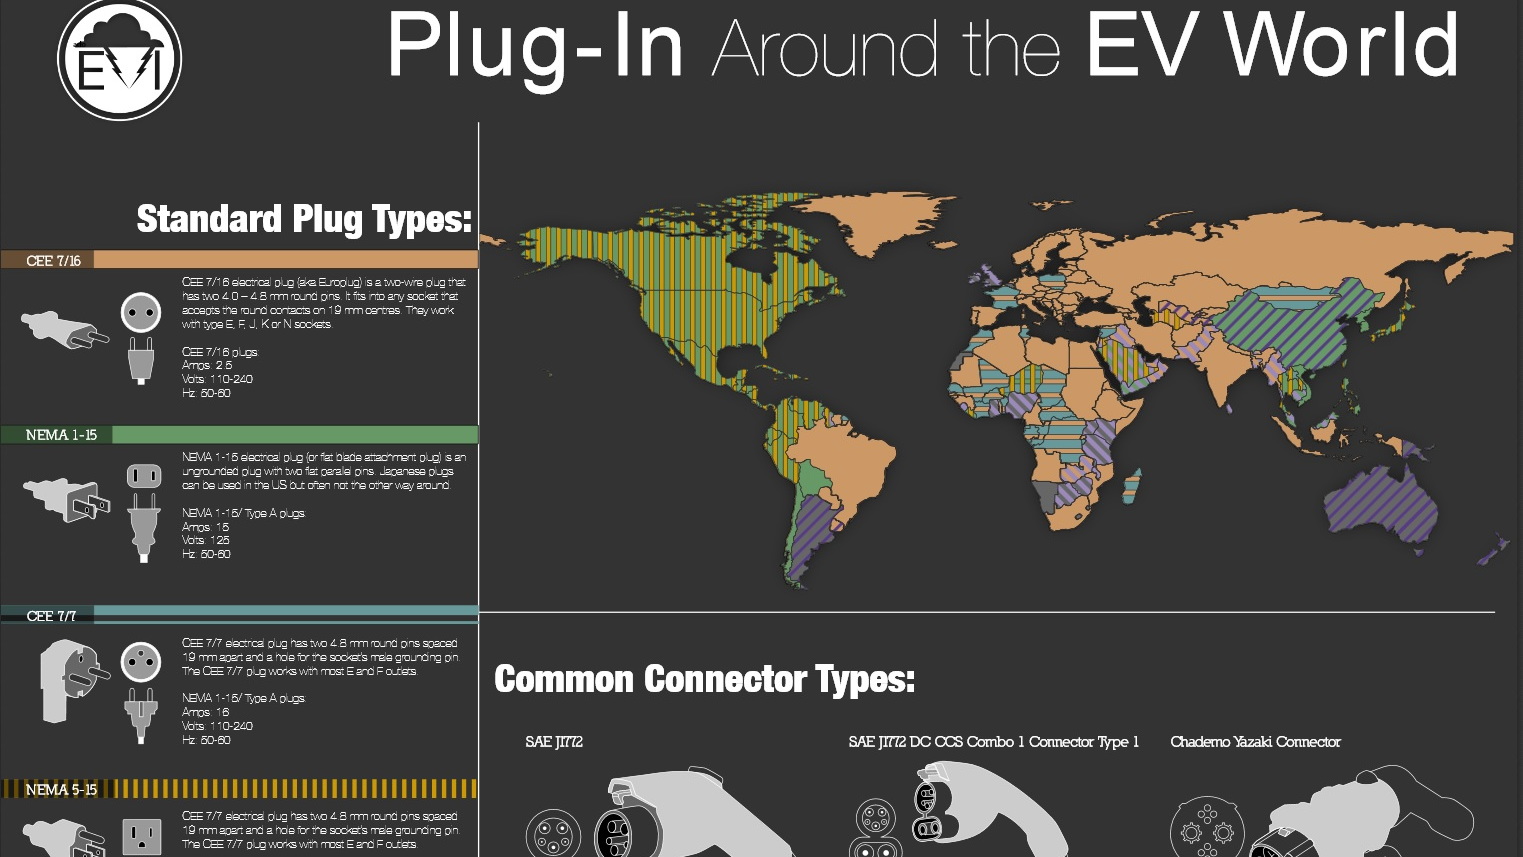 EV Institute Plug-In Around the World charging-connector poster (top portion)